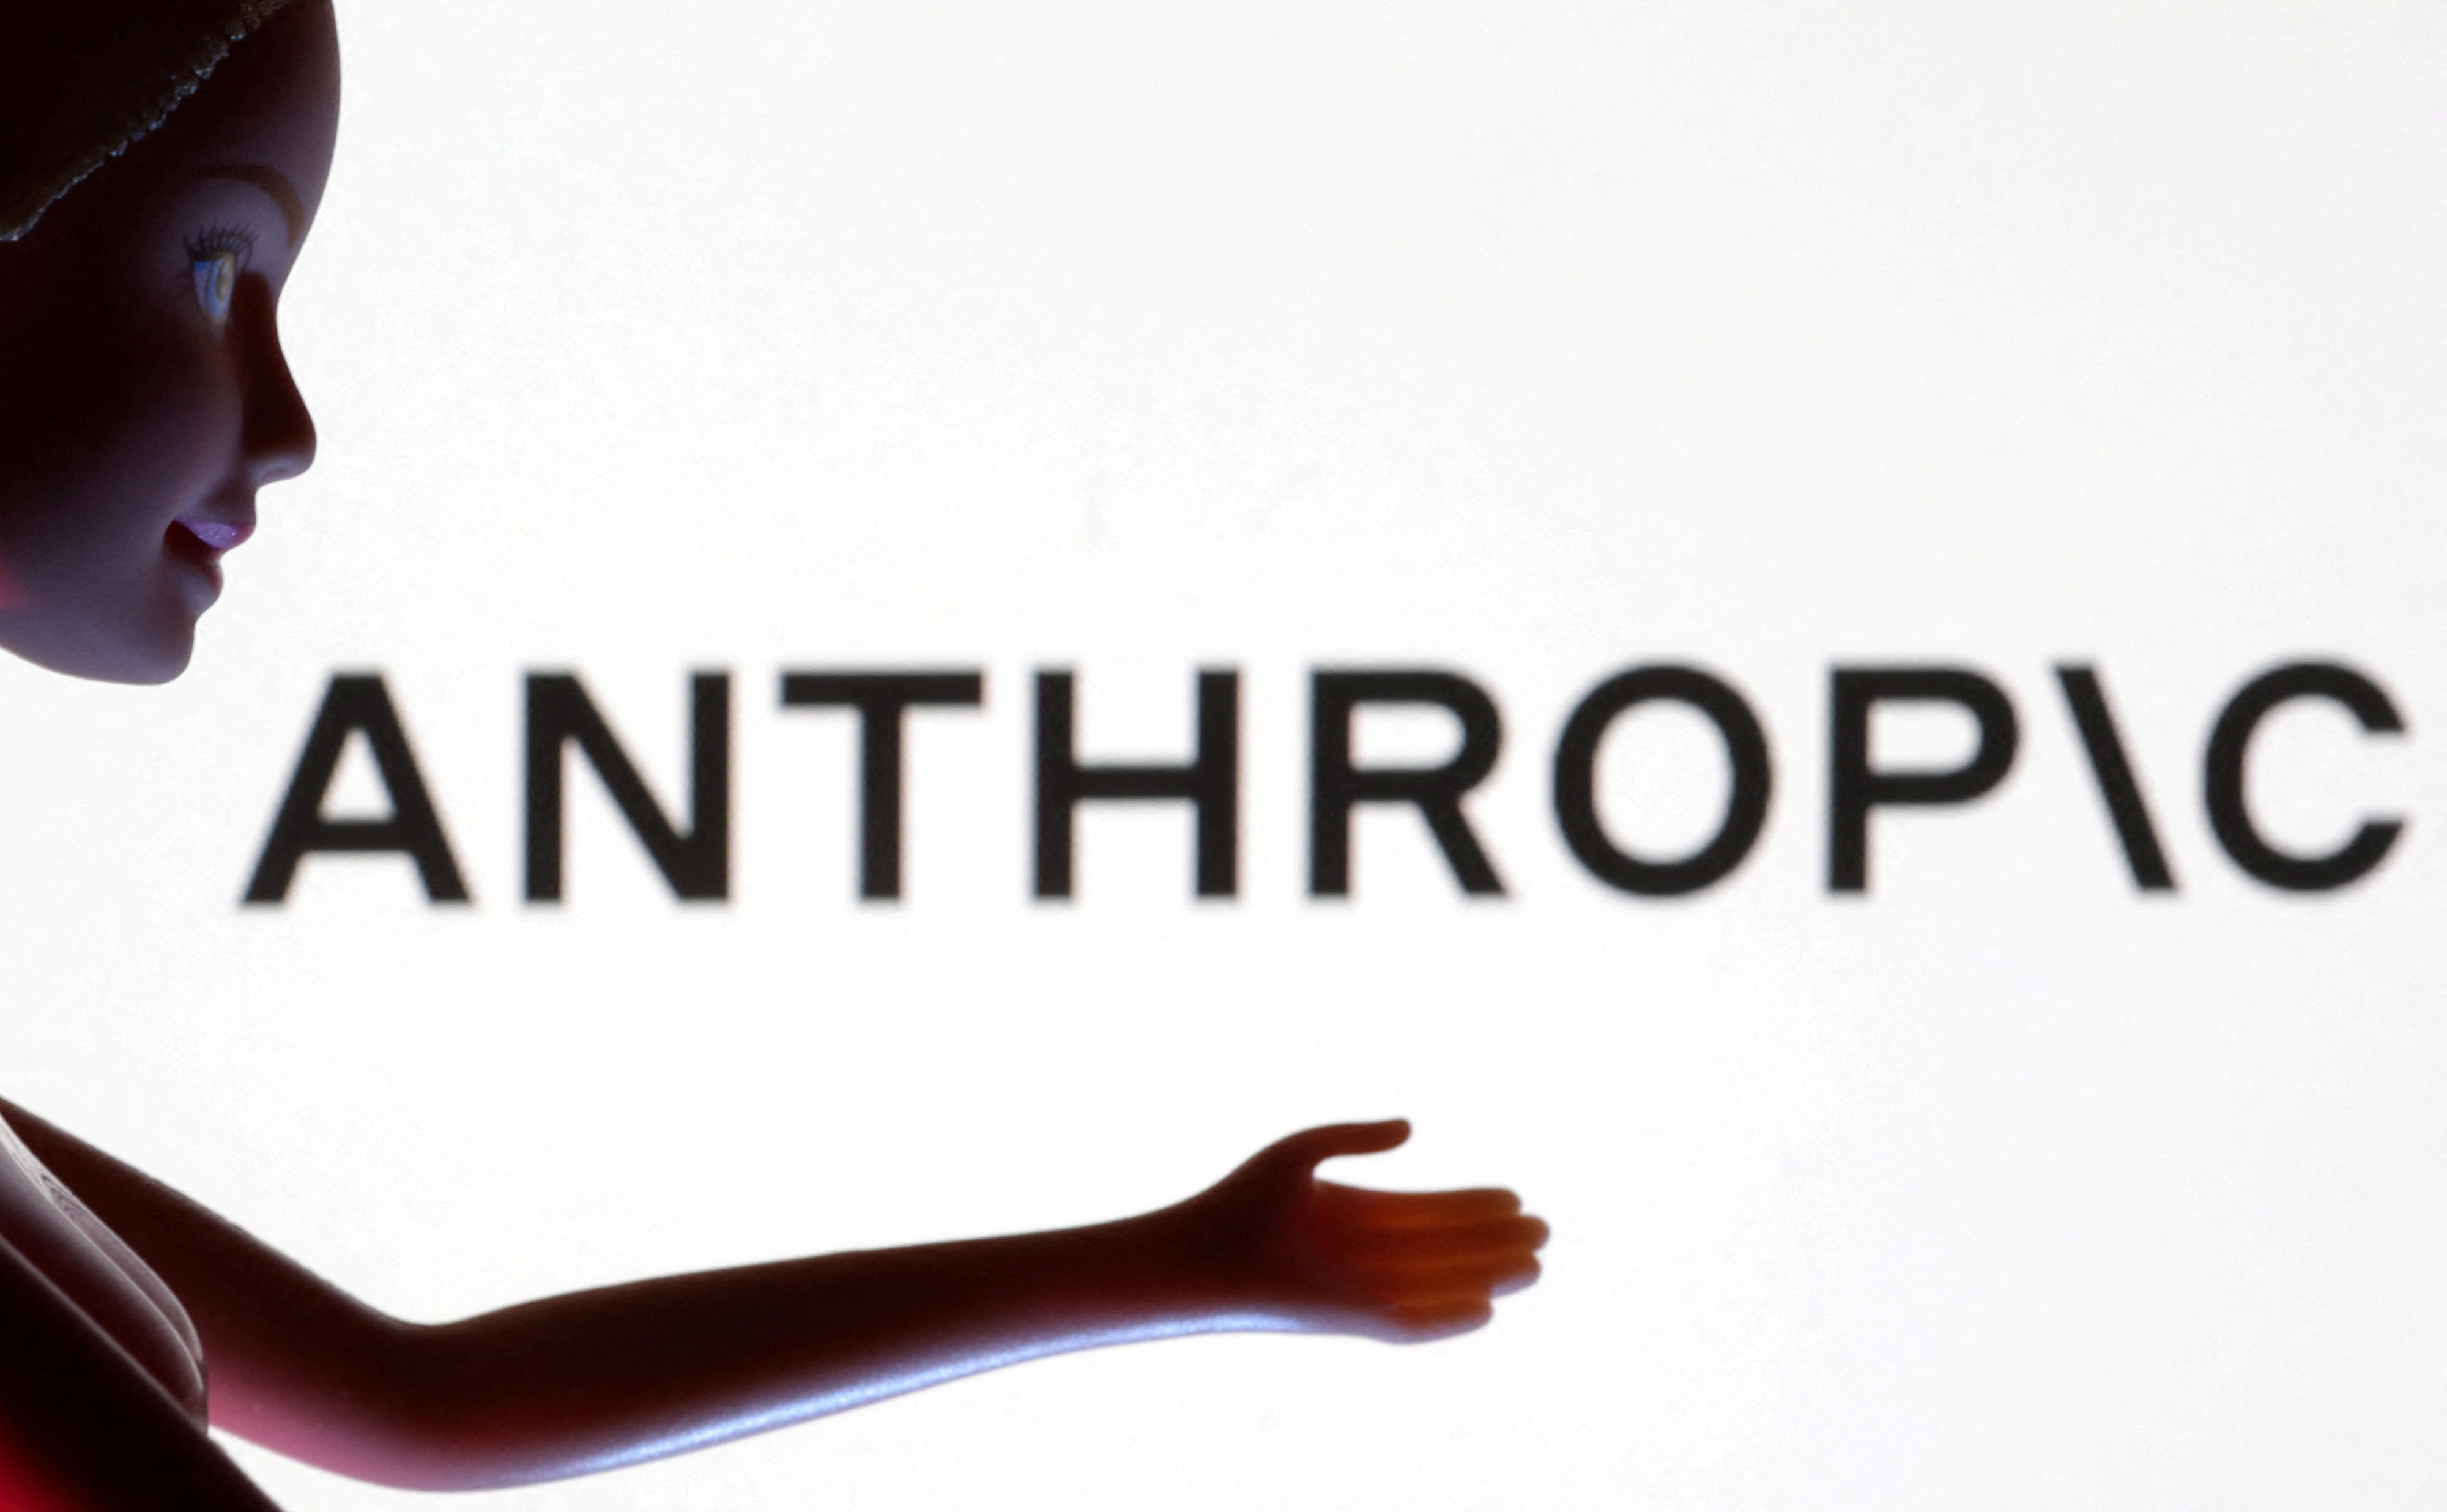 Google-backed Anthropic raises $450 mln in latest AI funding | Reuters